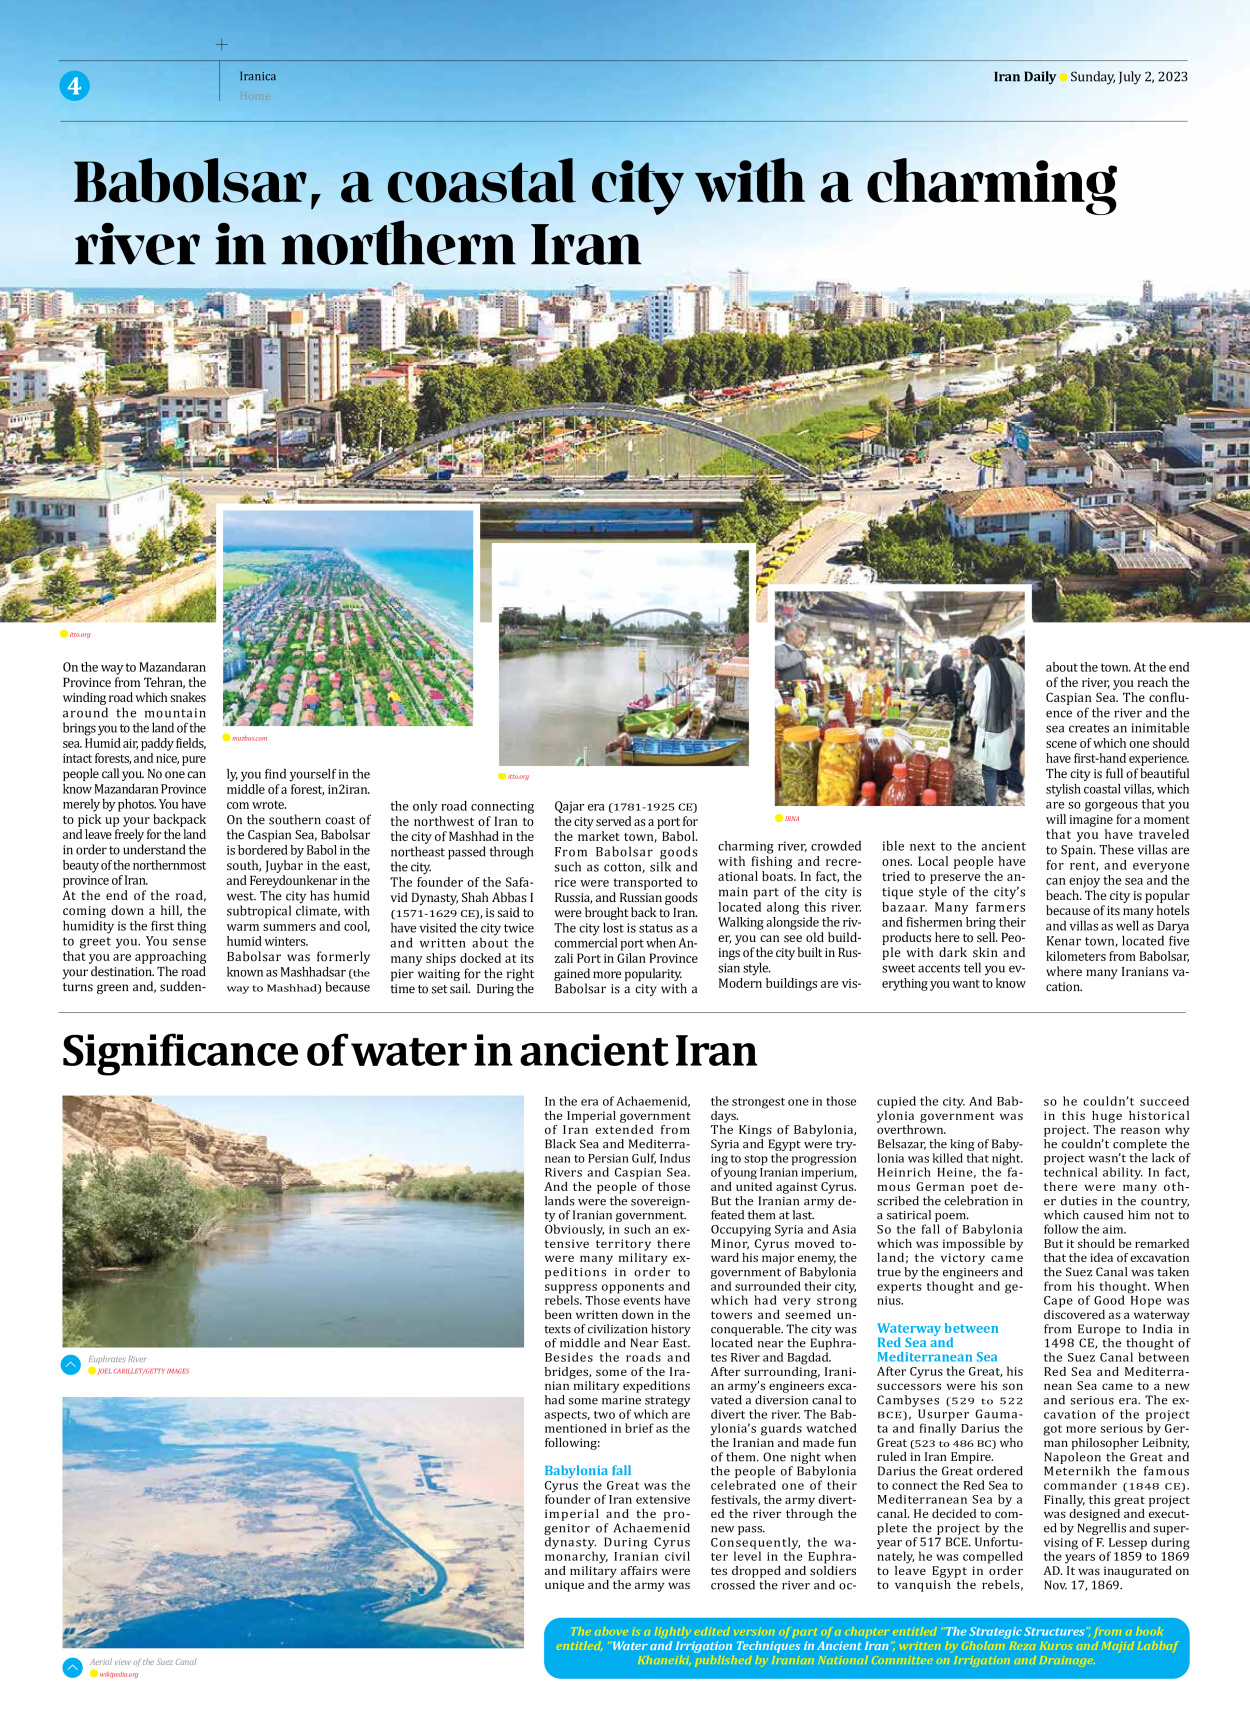 Iran Daily - Number Seven Thousand Three Hundred and Twenty Eight - 02 July 2023 - Page 4